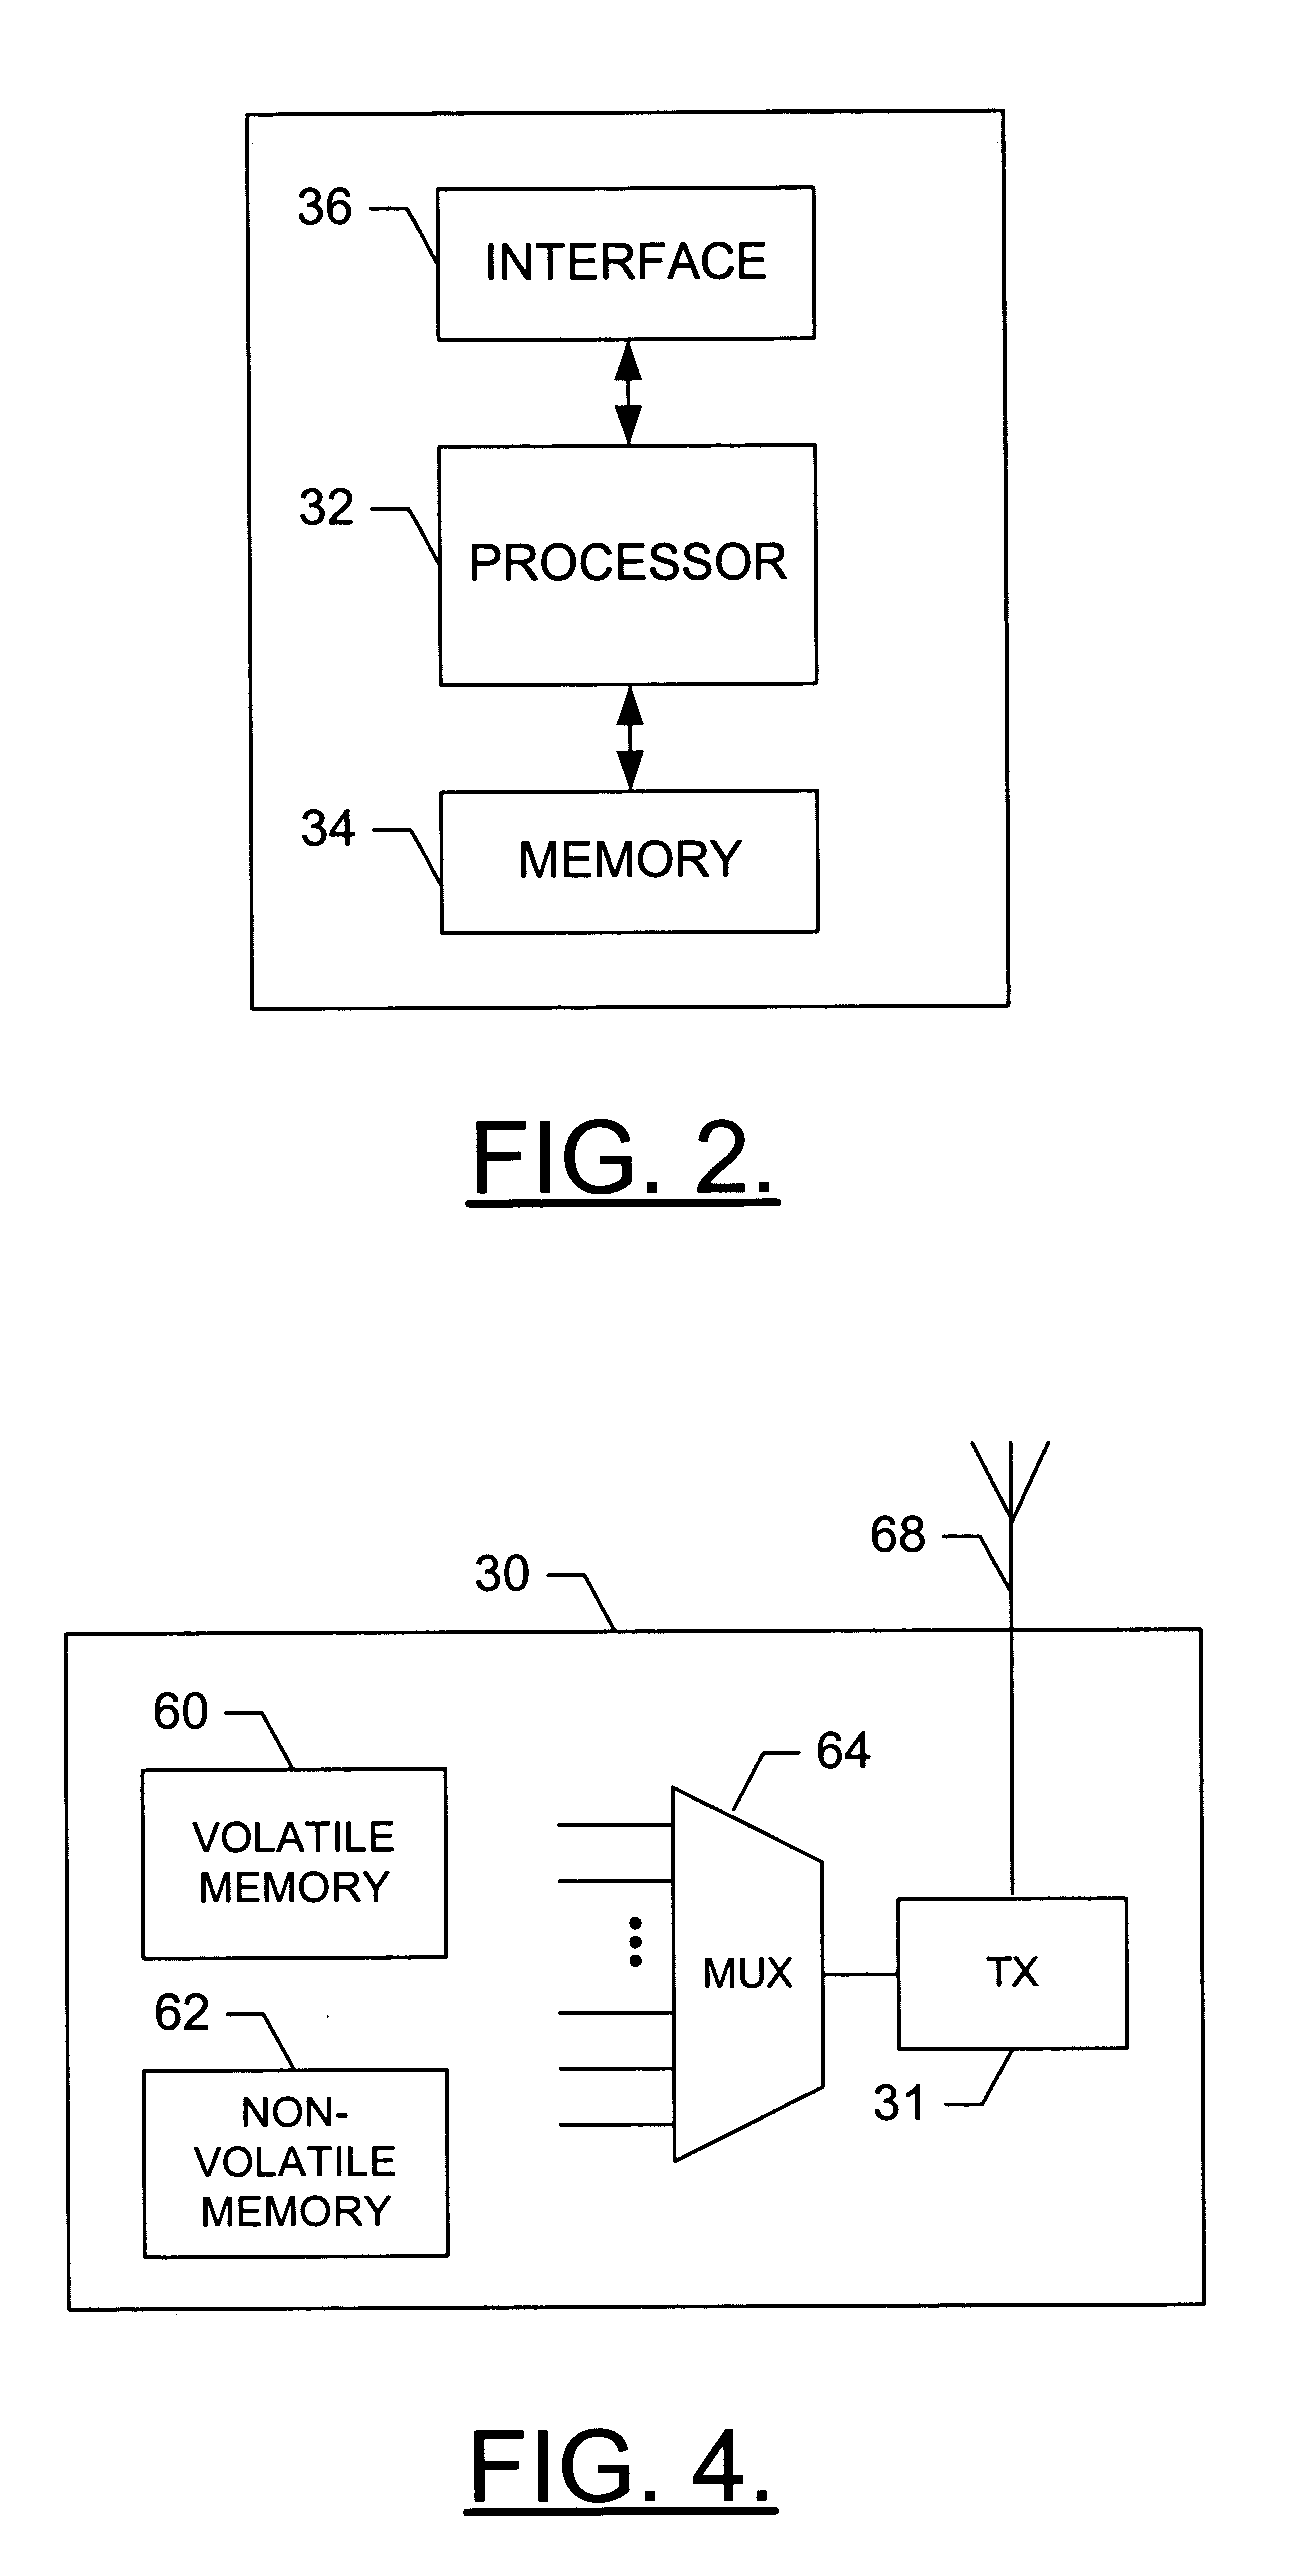 System and associated terminal, method and computer program product for controlling storage of content